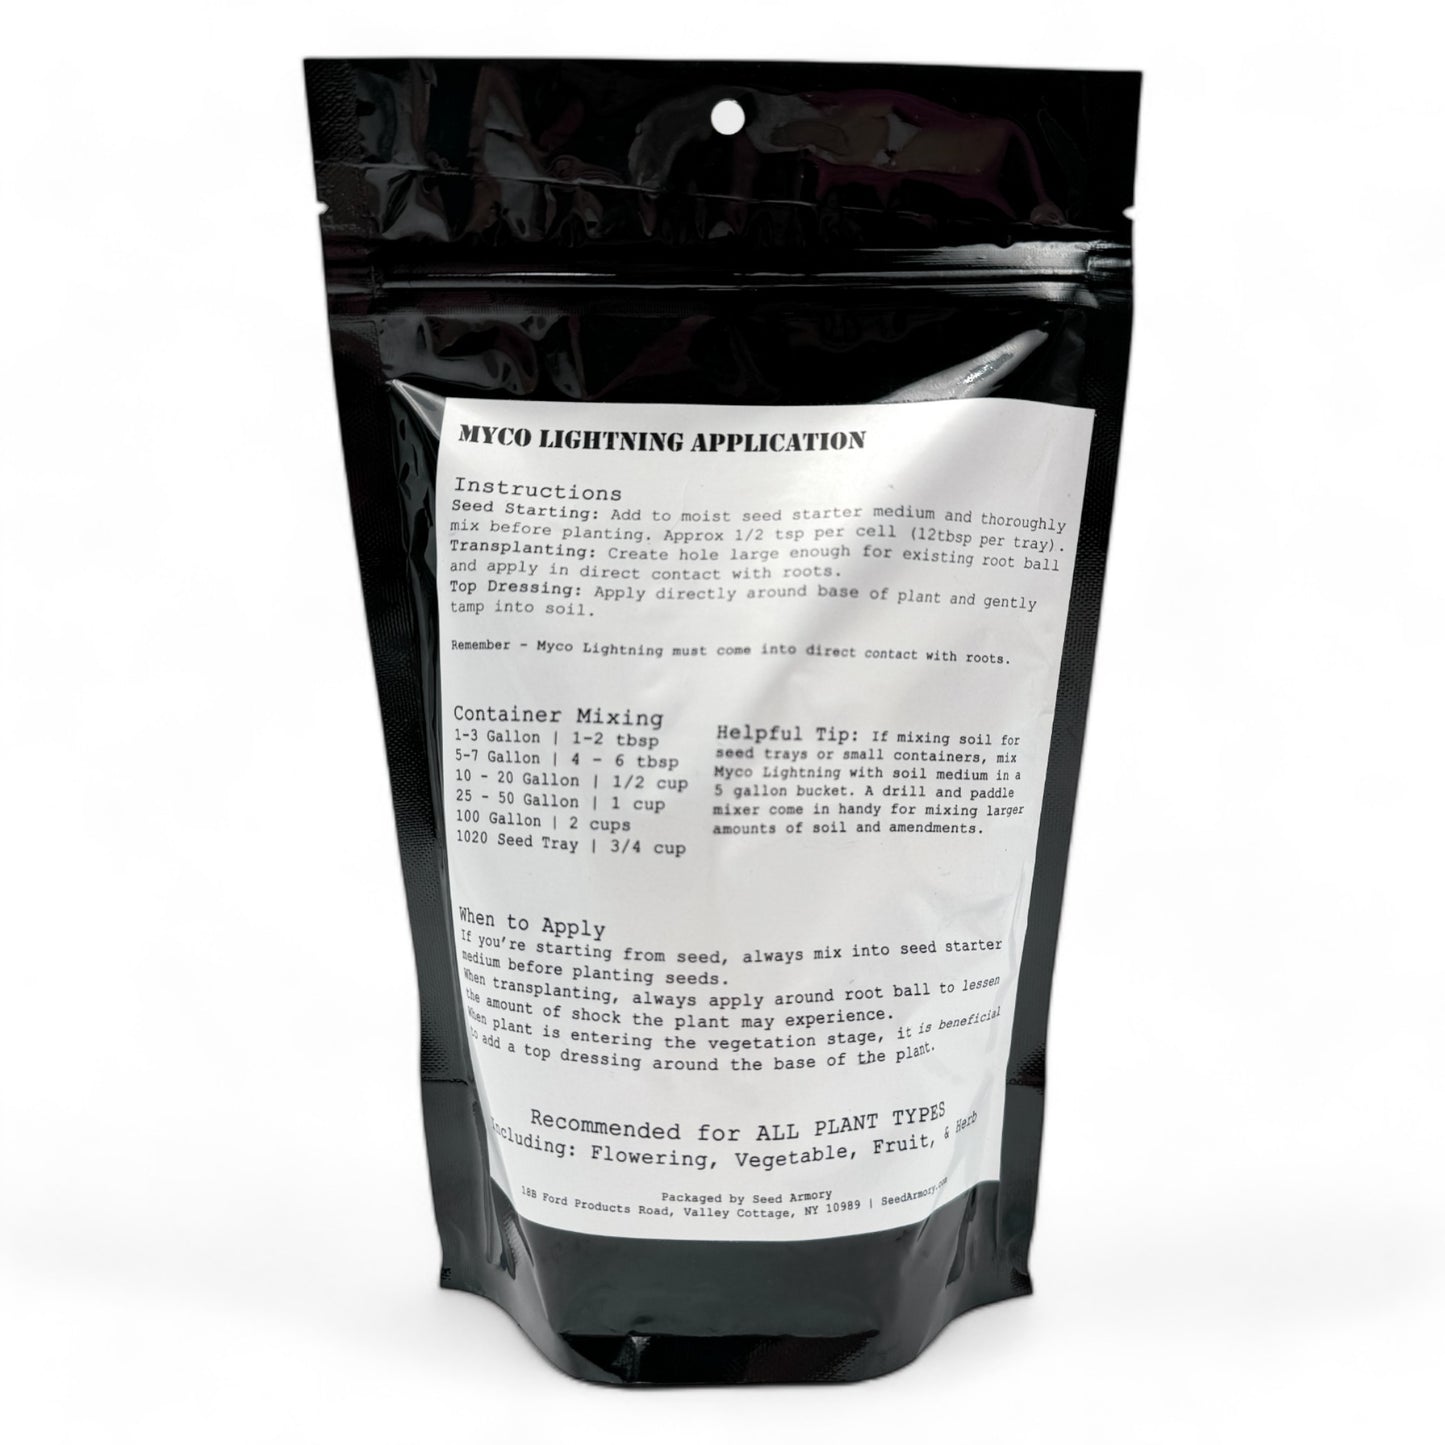 Reverse package of Myco Lightning plant nutrient powder with instructions